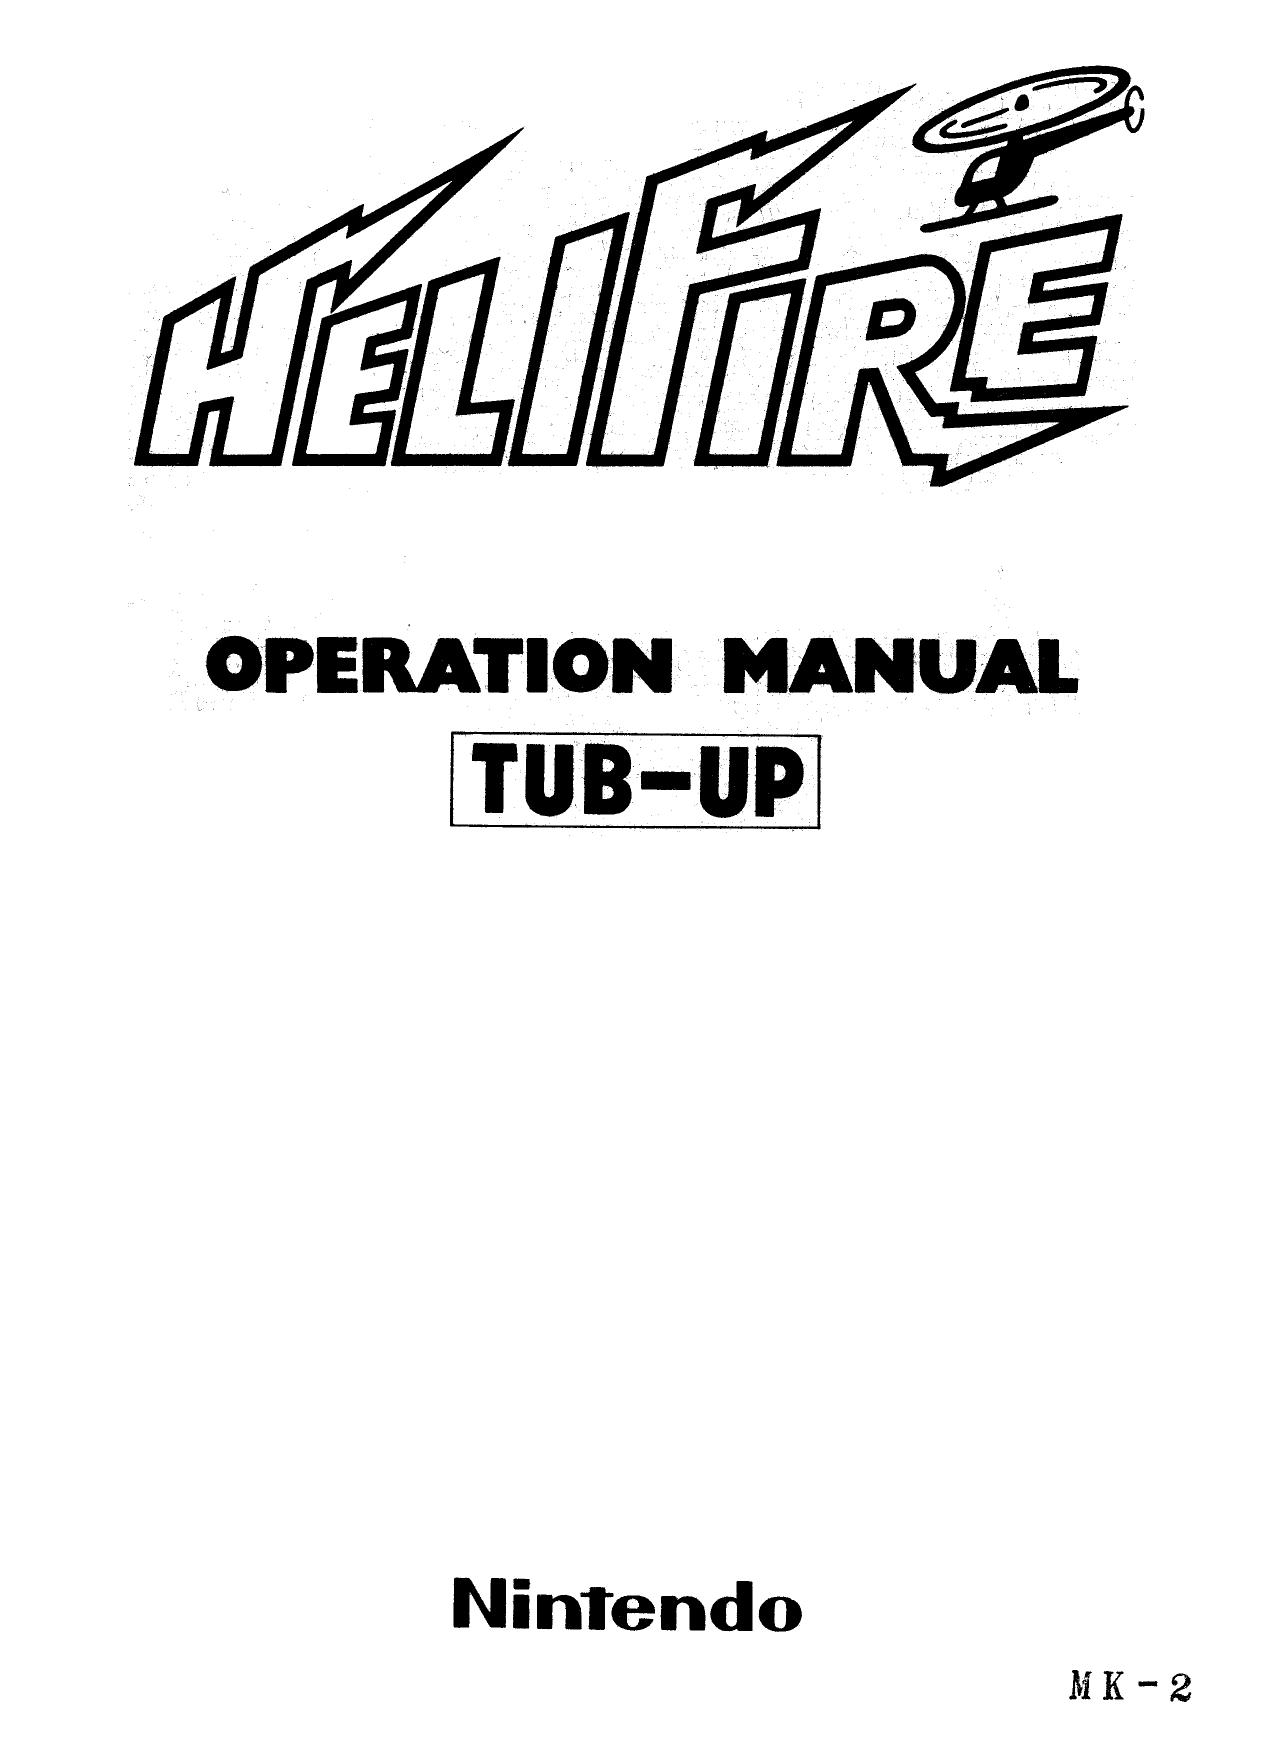 Helifire